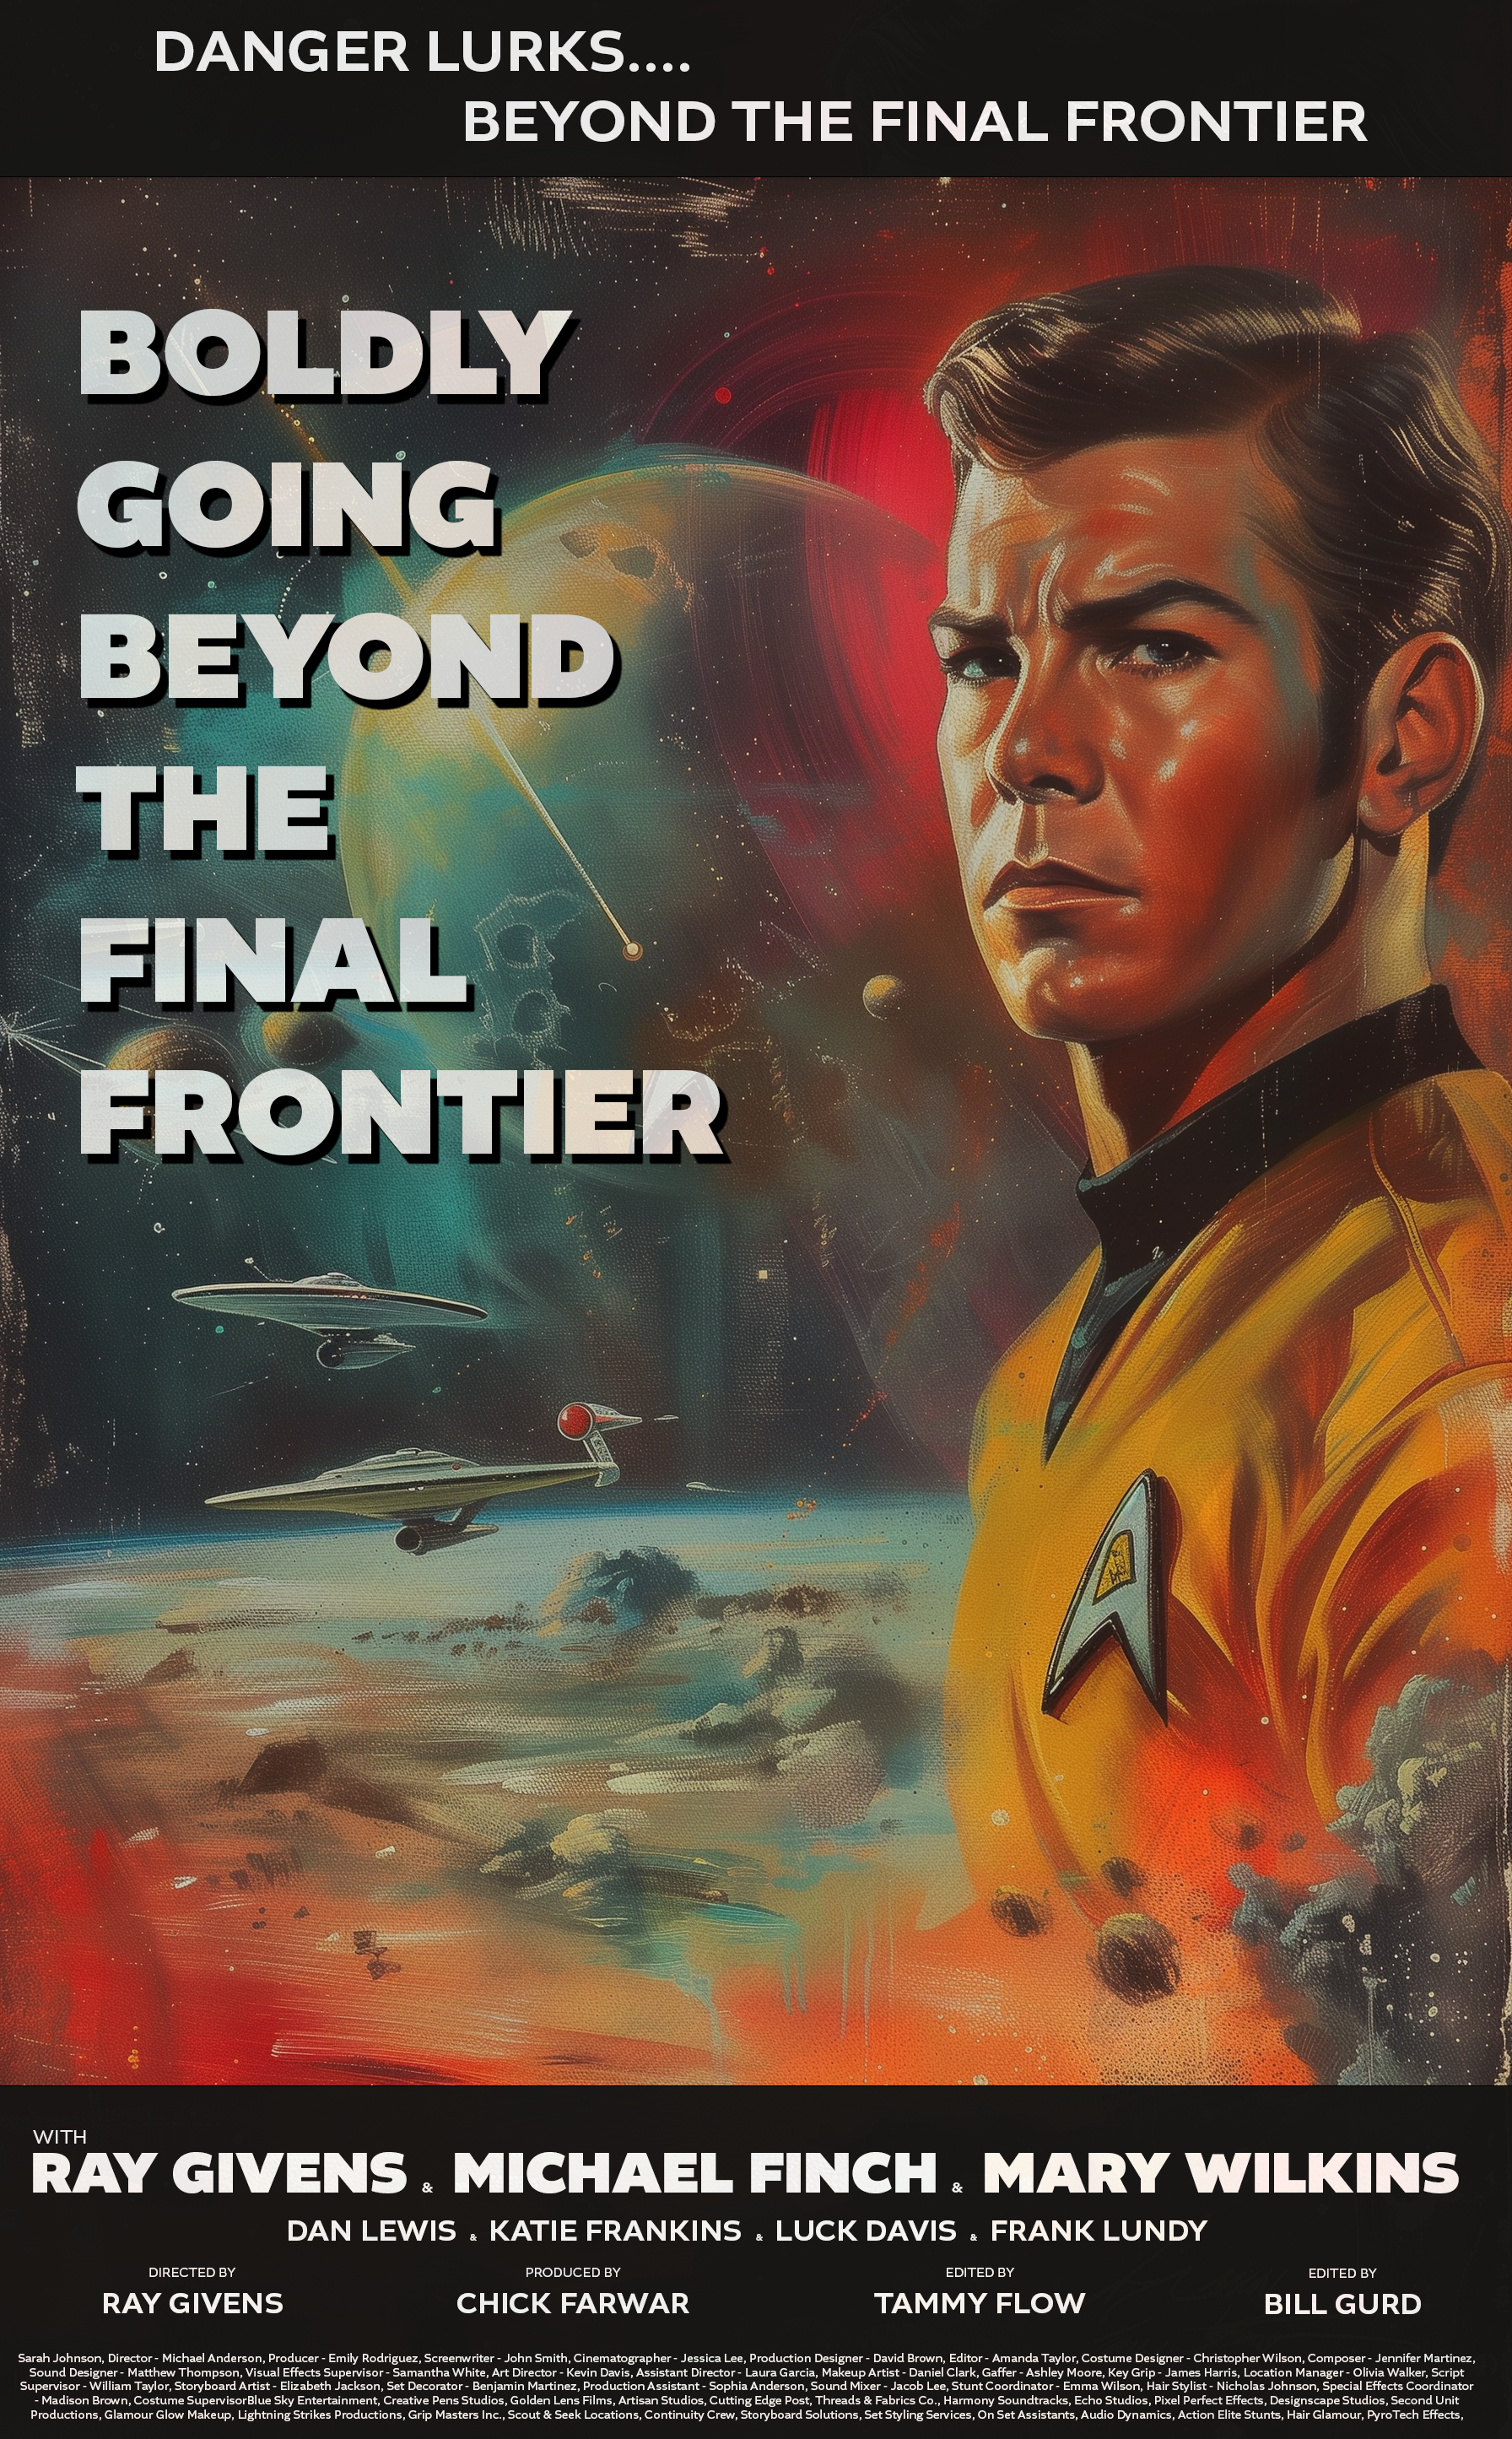 Name:  Beyond the Final Frontier.png
Views: 146
Size:  8.19 MB